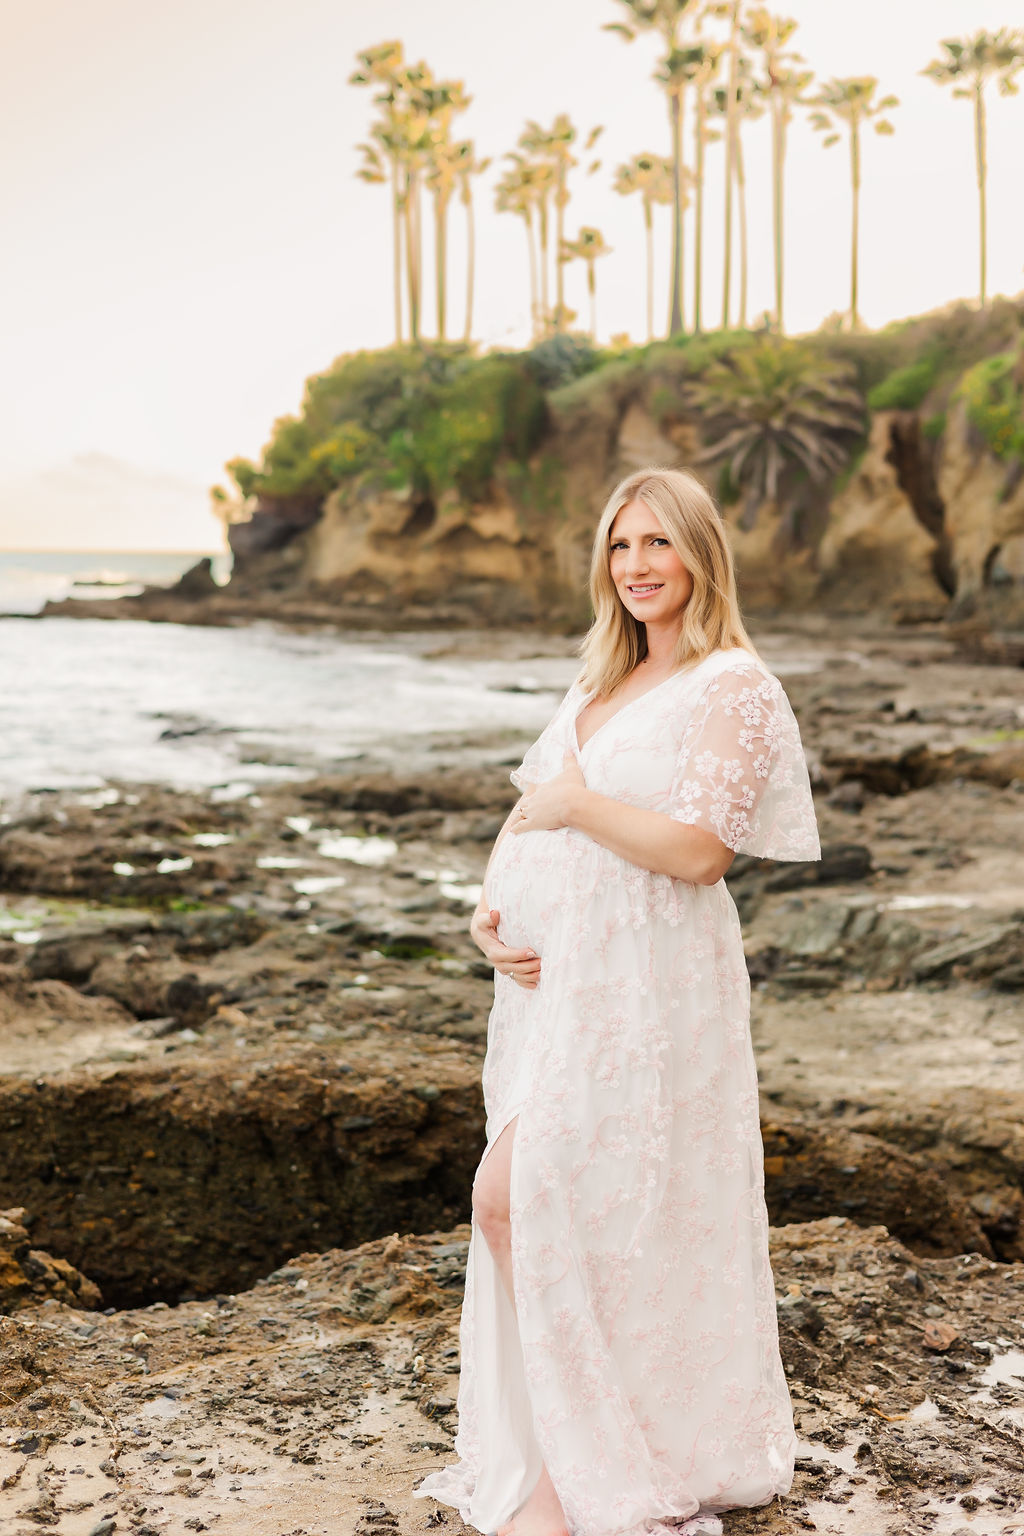 A mother to be in a long white lace maternity gown stands on a rocky shore with a steep cliff behind her